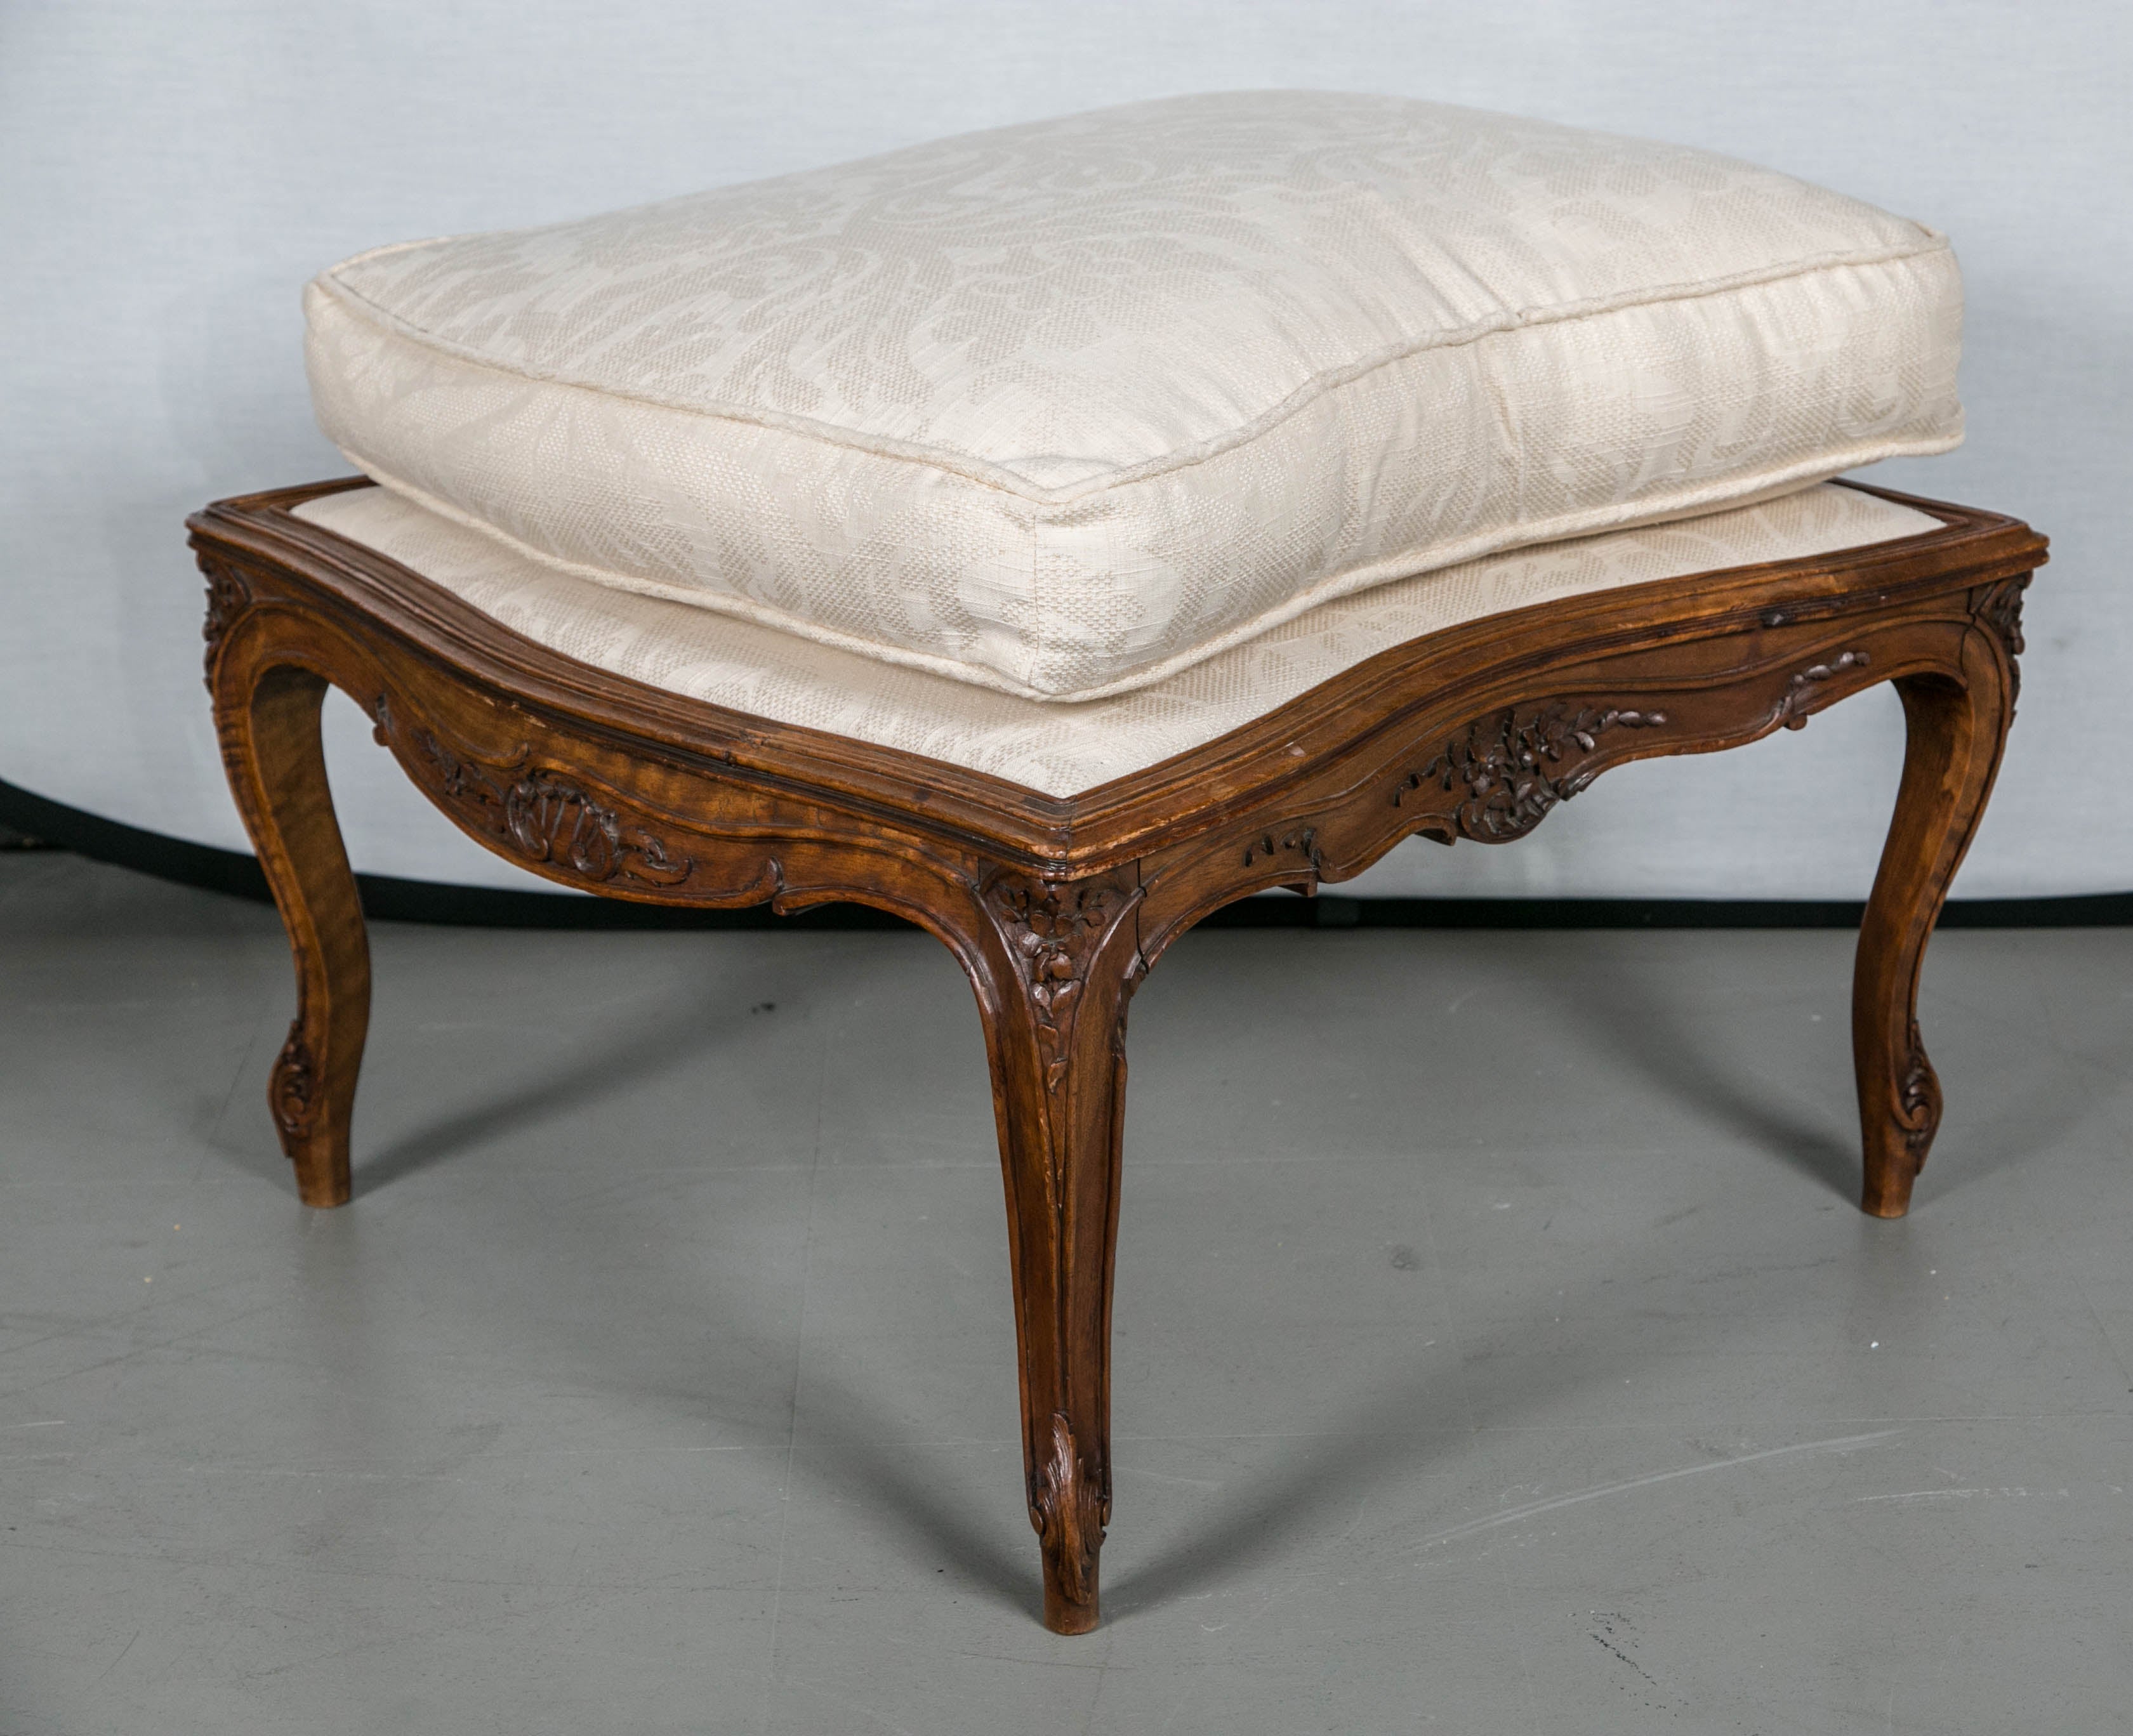 This fabulous chaise lounge circa 1900 newly upholstered in a lovely cream damask. Great carving in frame.